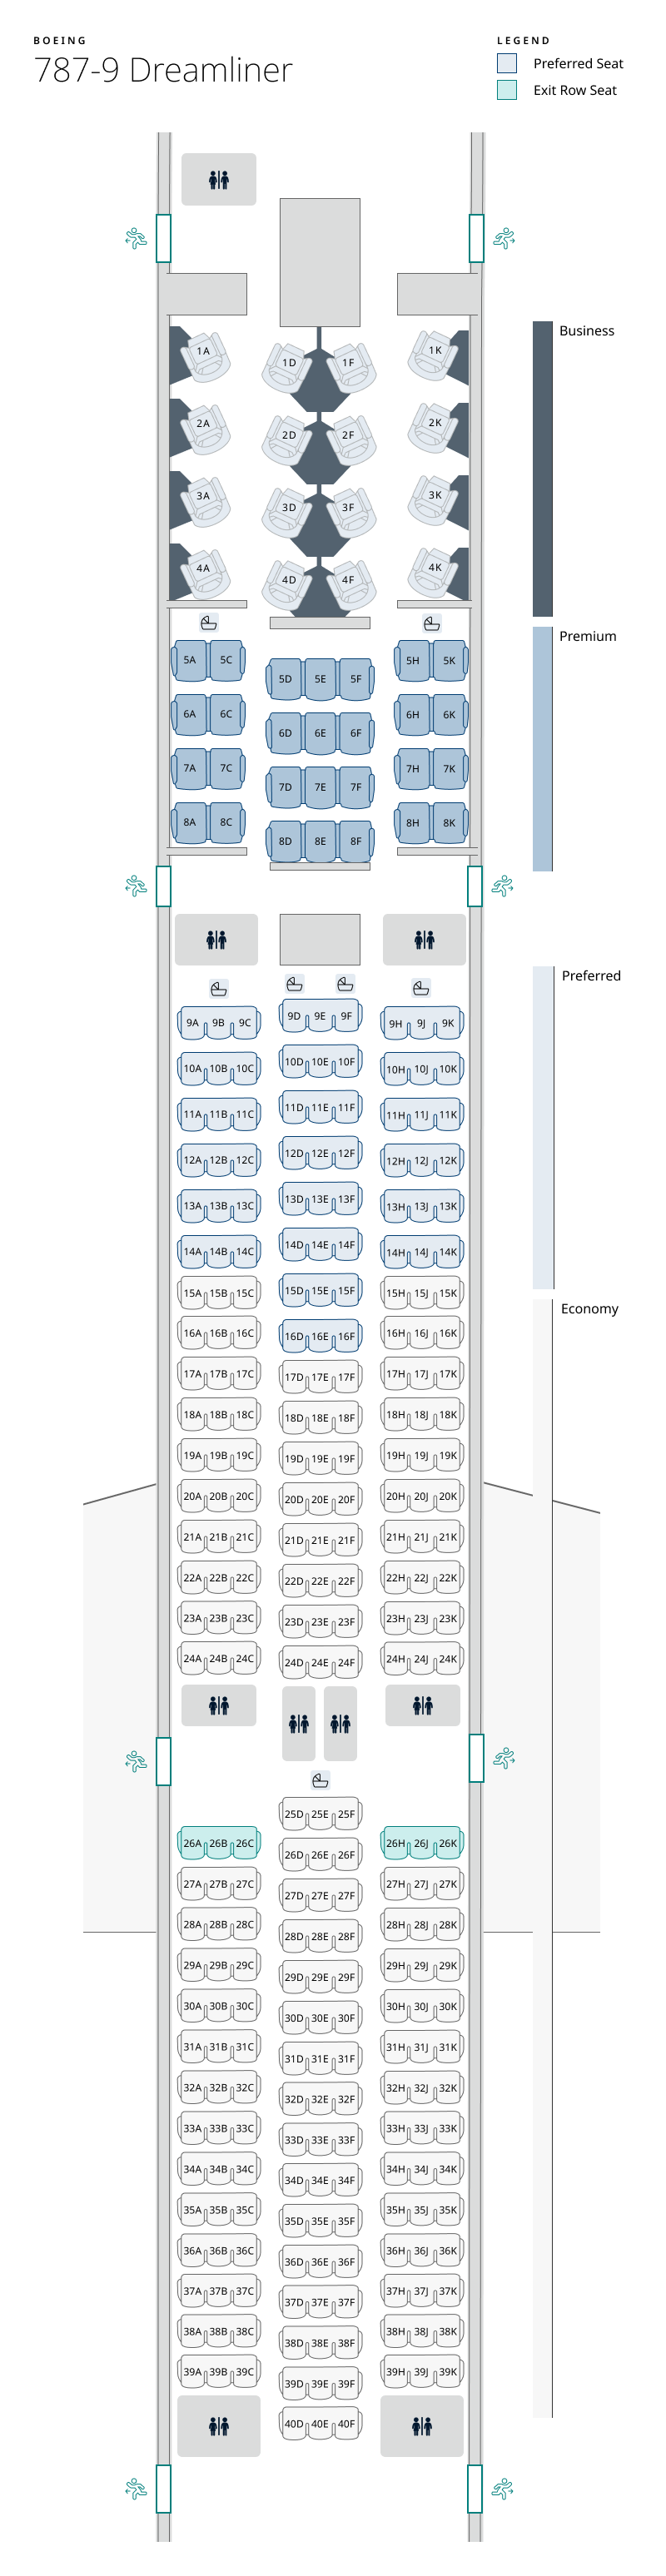 Seat map of 787-9 Dreamliner. Seat information available in table below